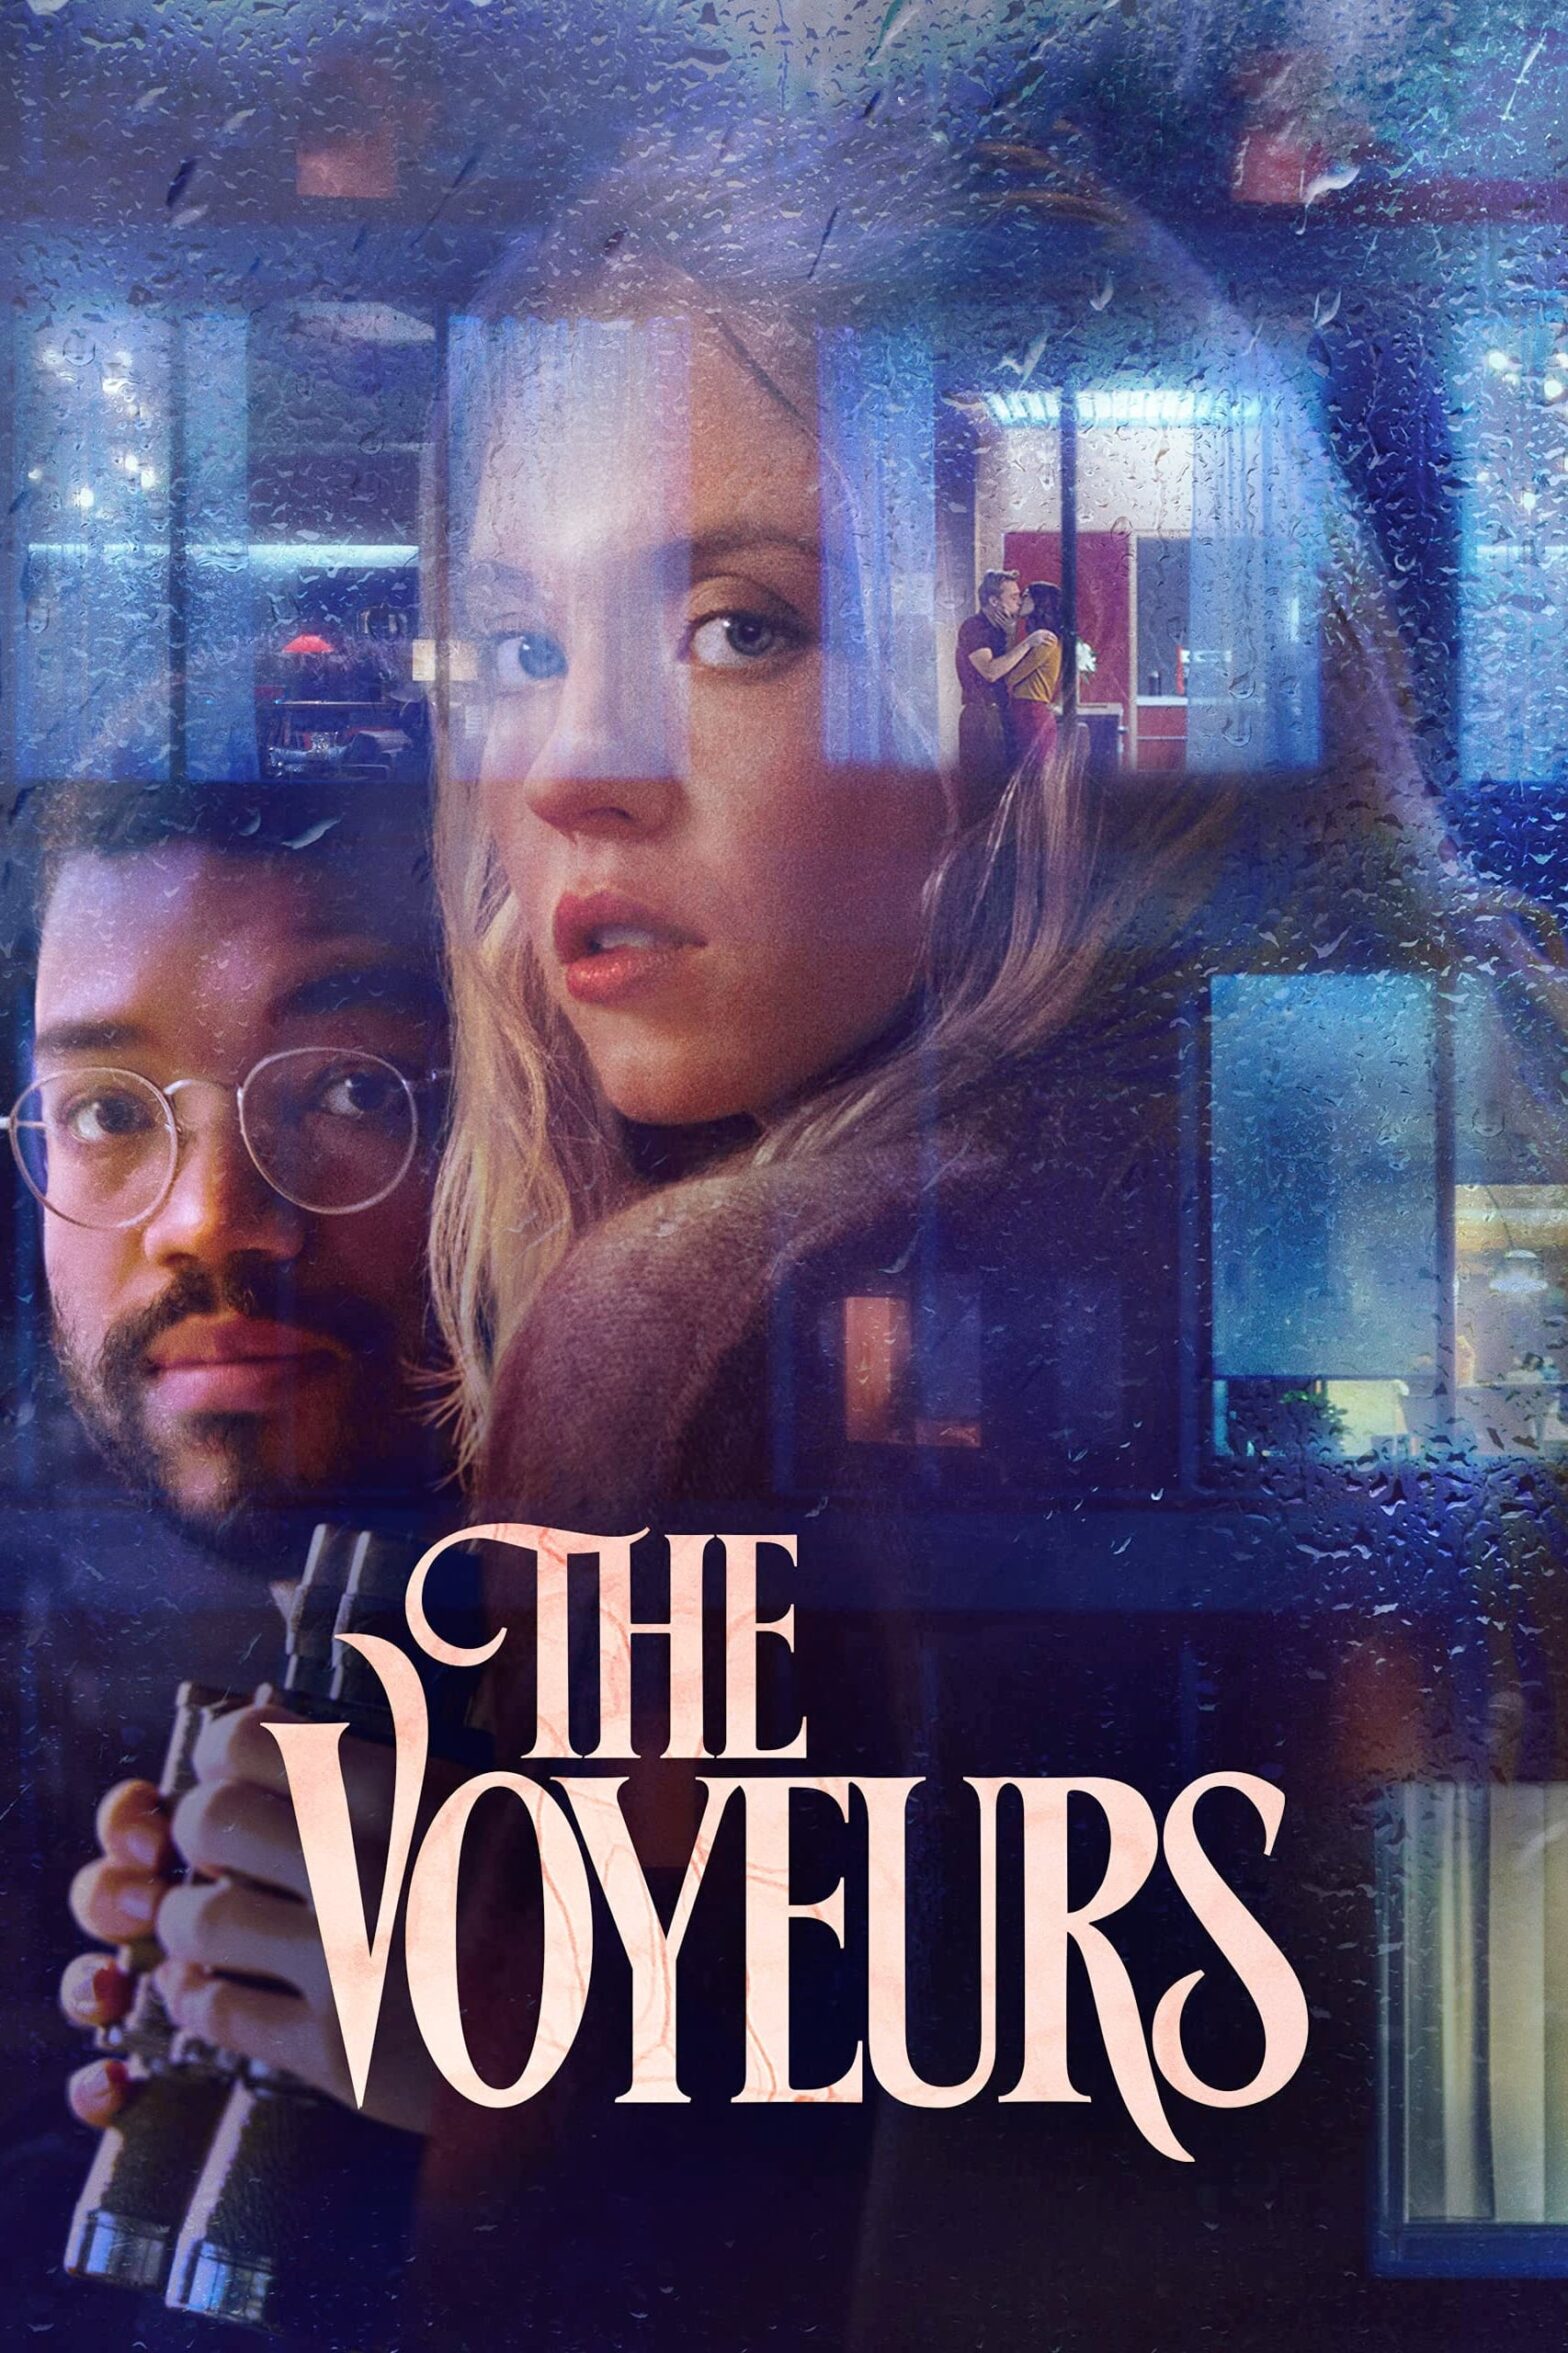 Poster for the movie "The Voyeurs"